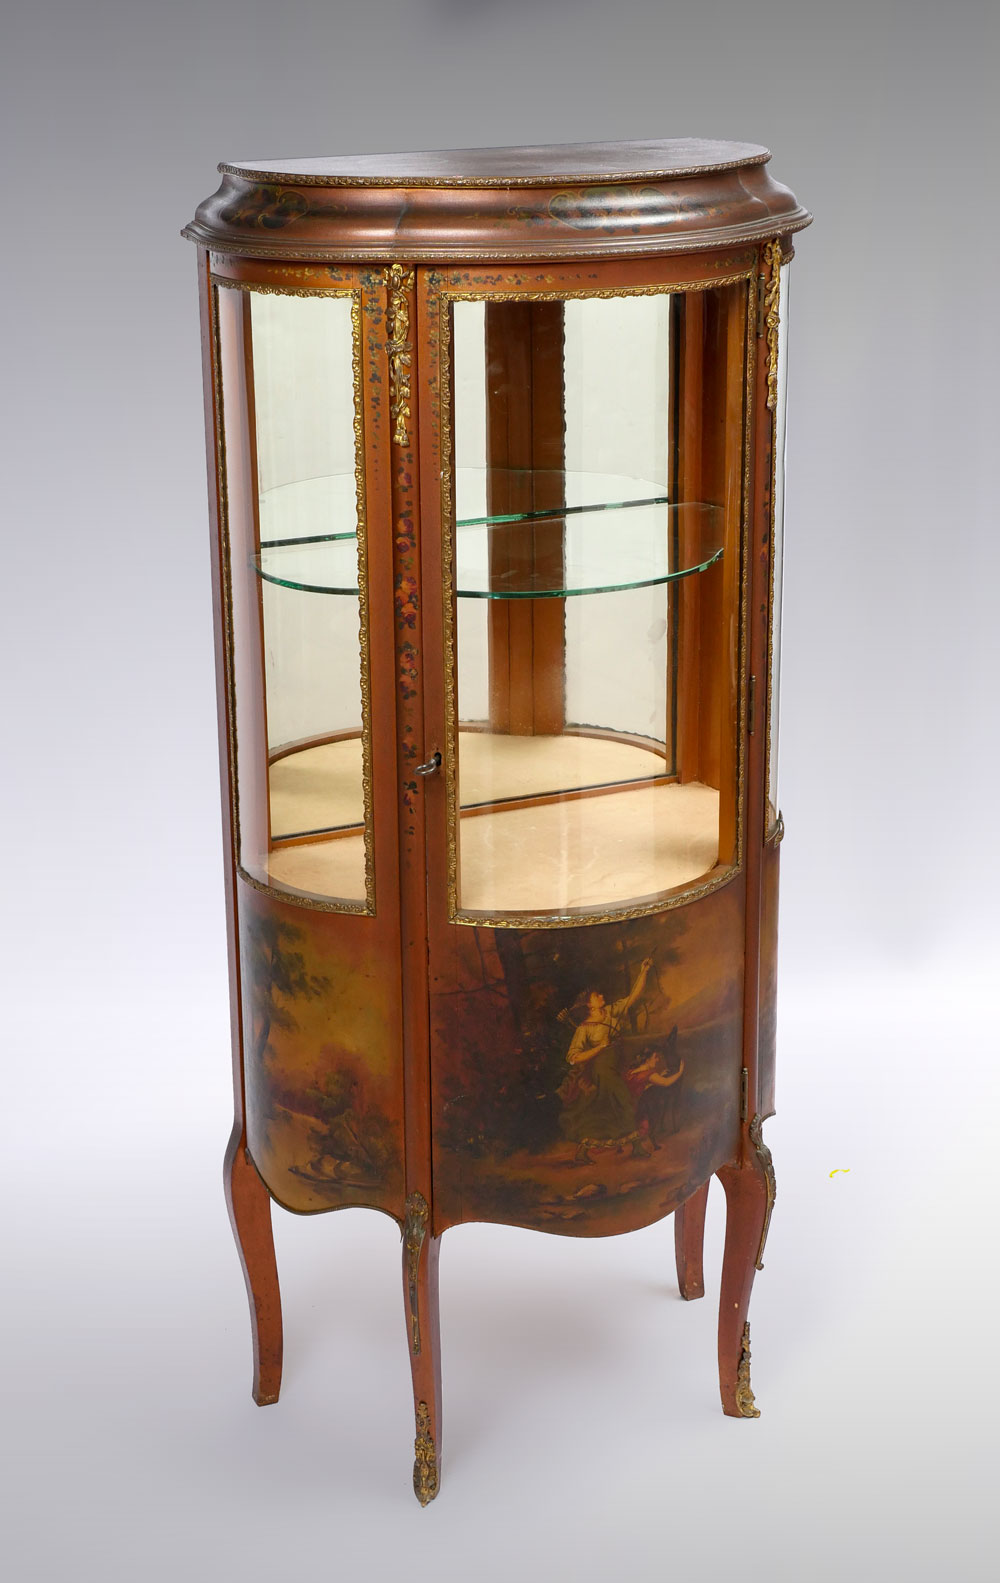 FRENCH PAINTED VITRINE: French